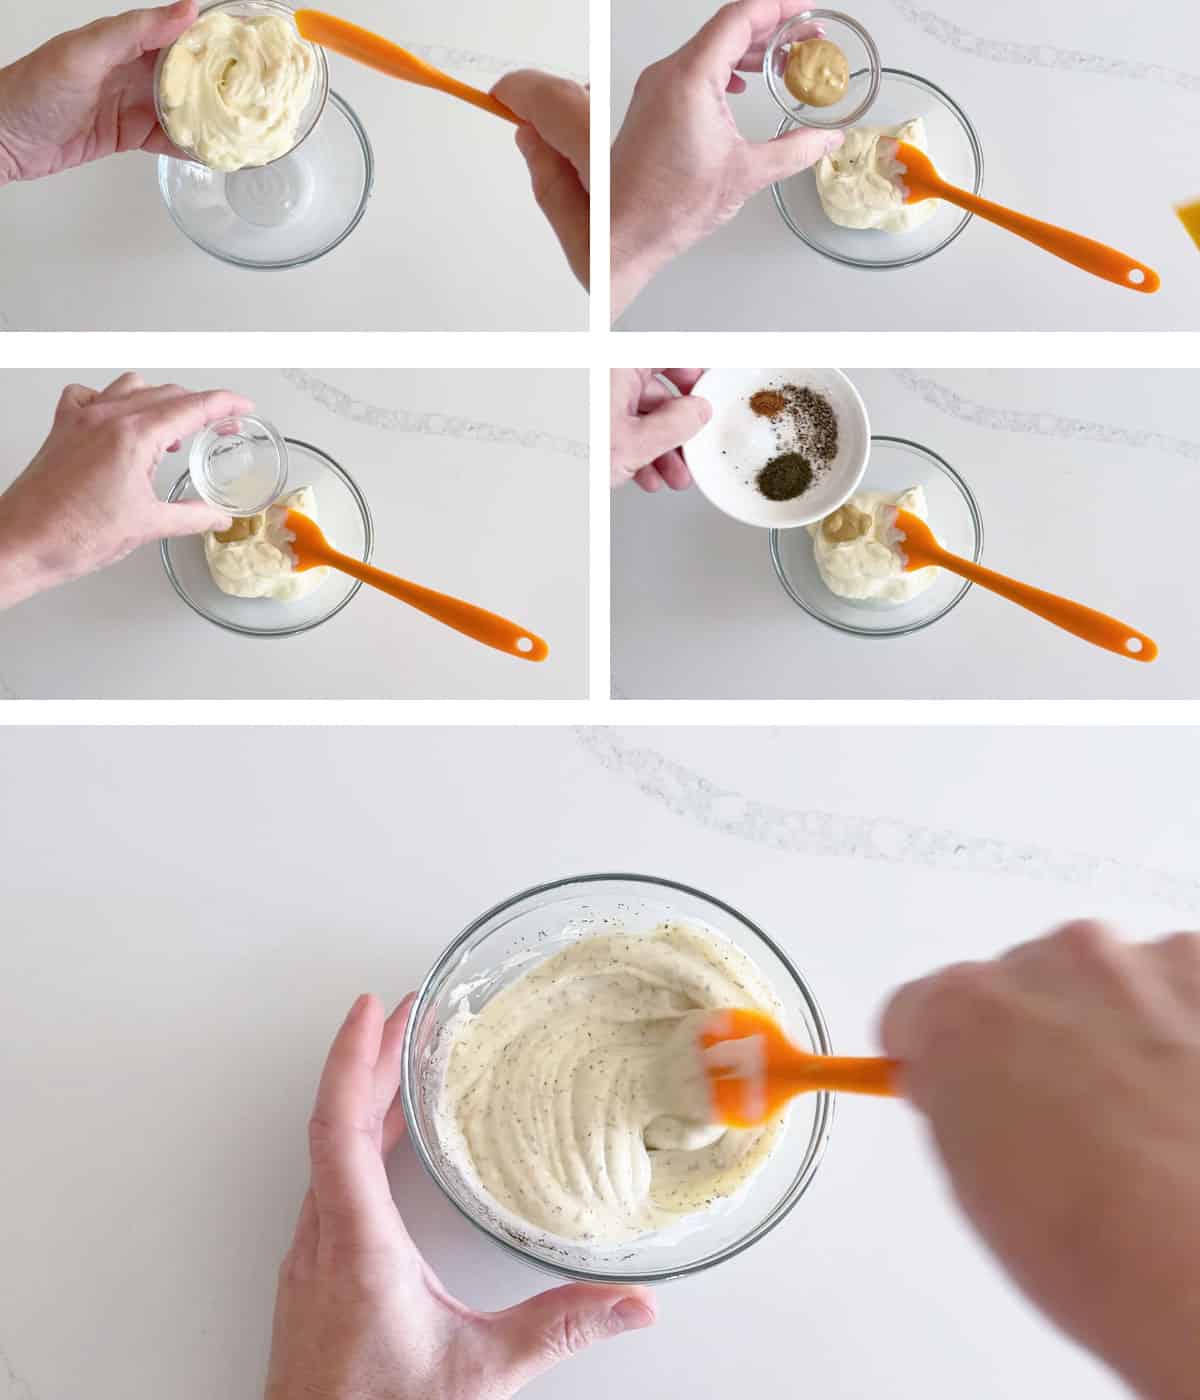 A five-photo collage showing how to mix mayo, mustard, lemon juice, and spices into a homemade tartar sauce. 